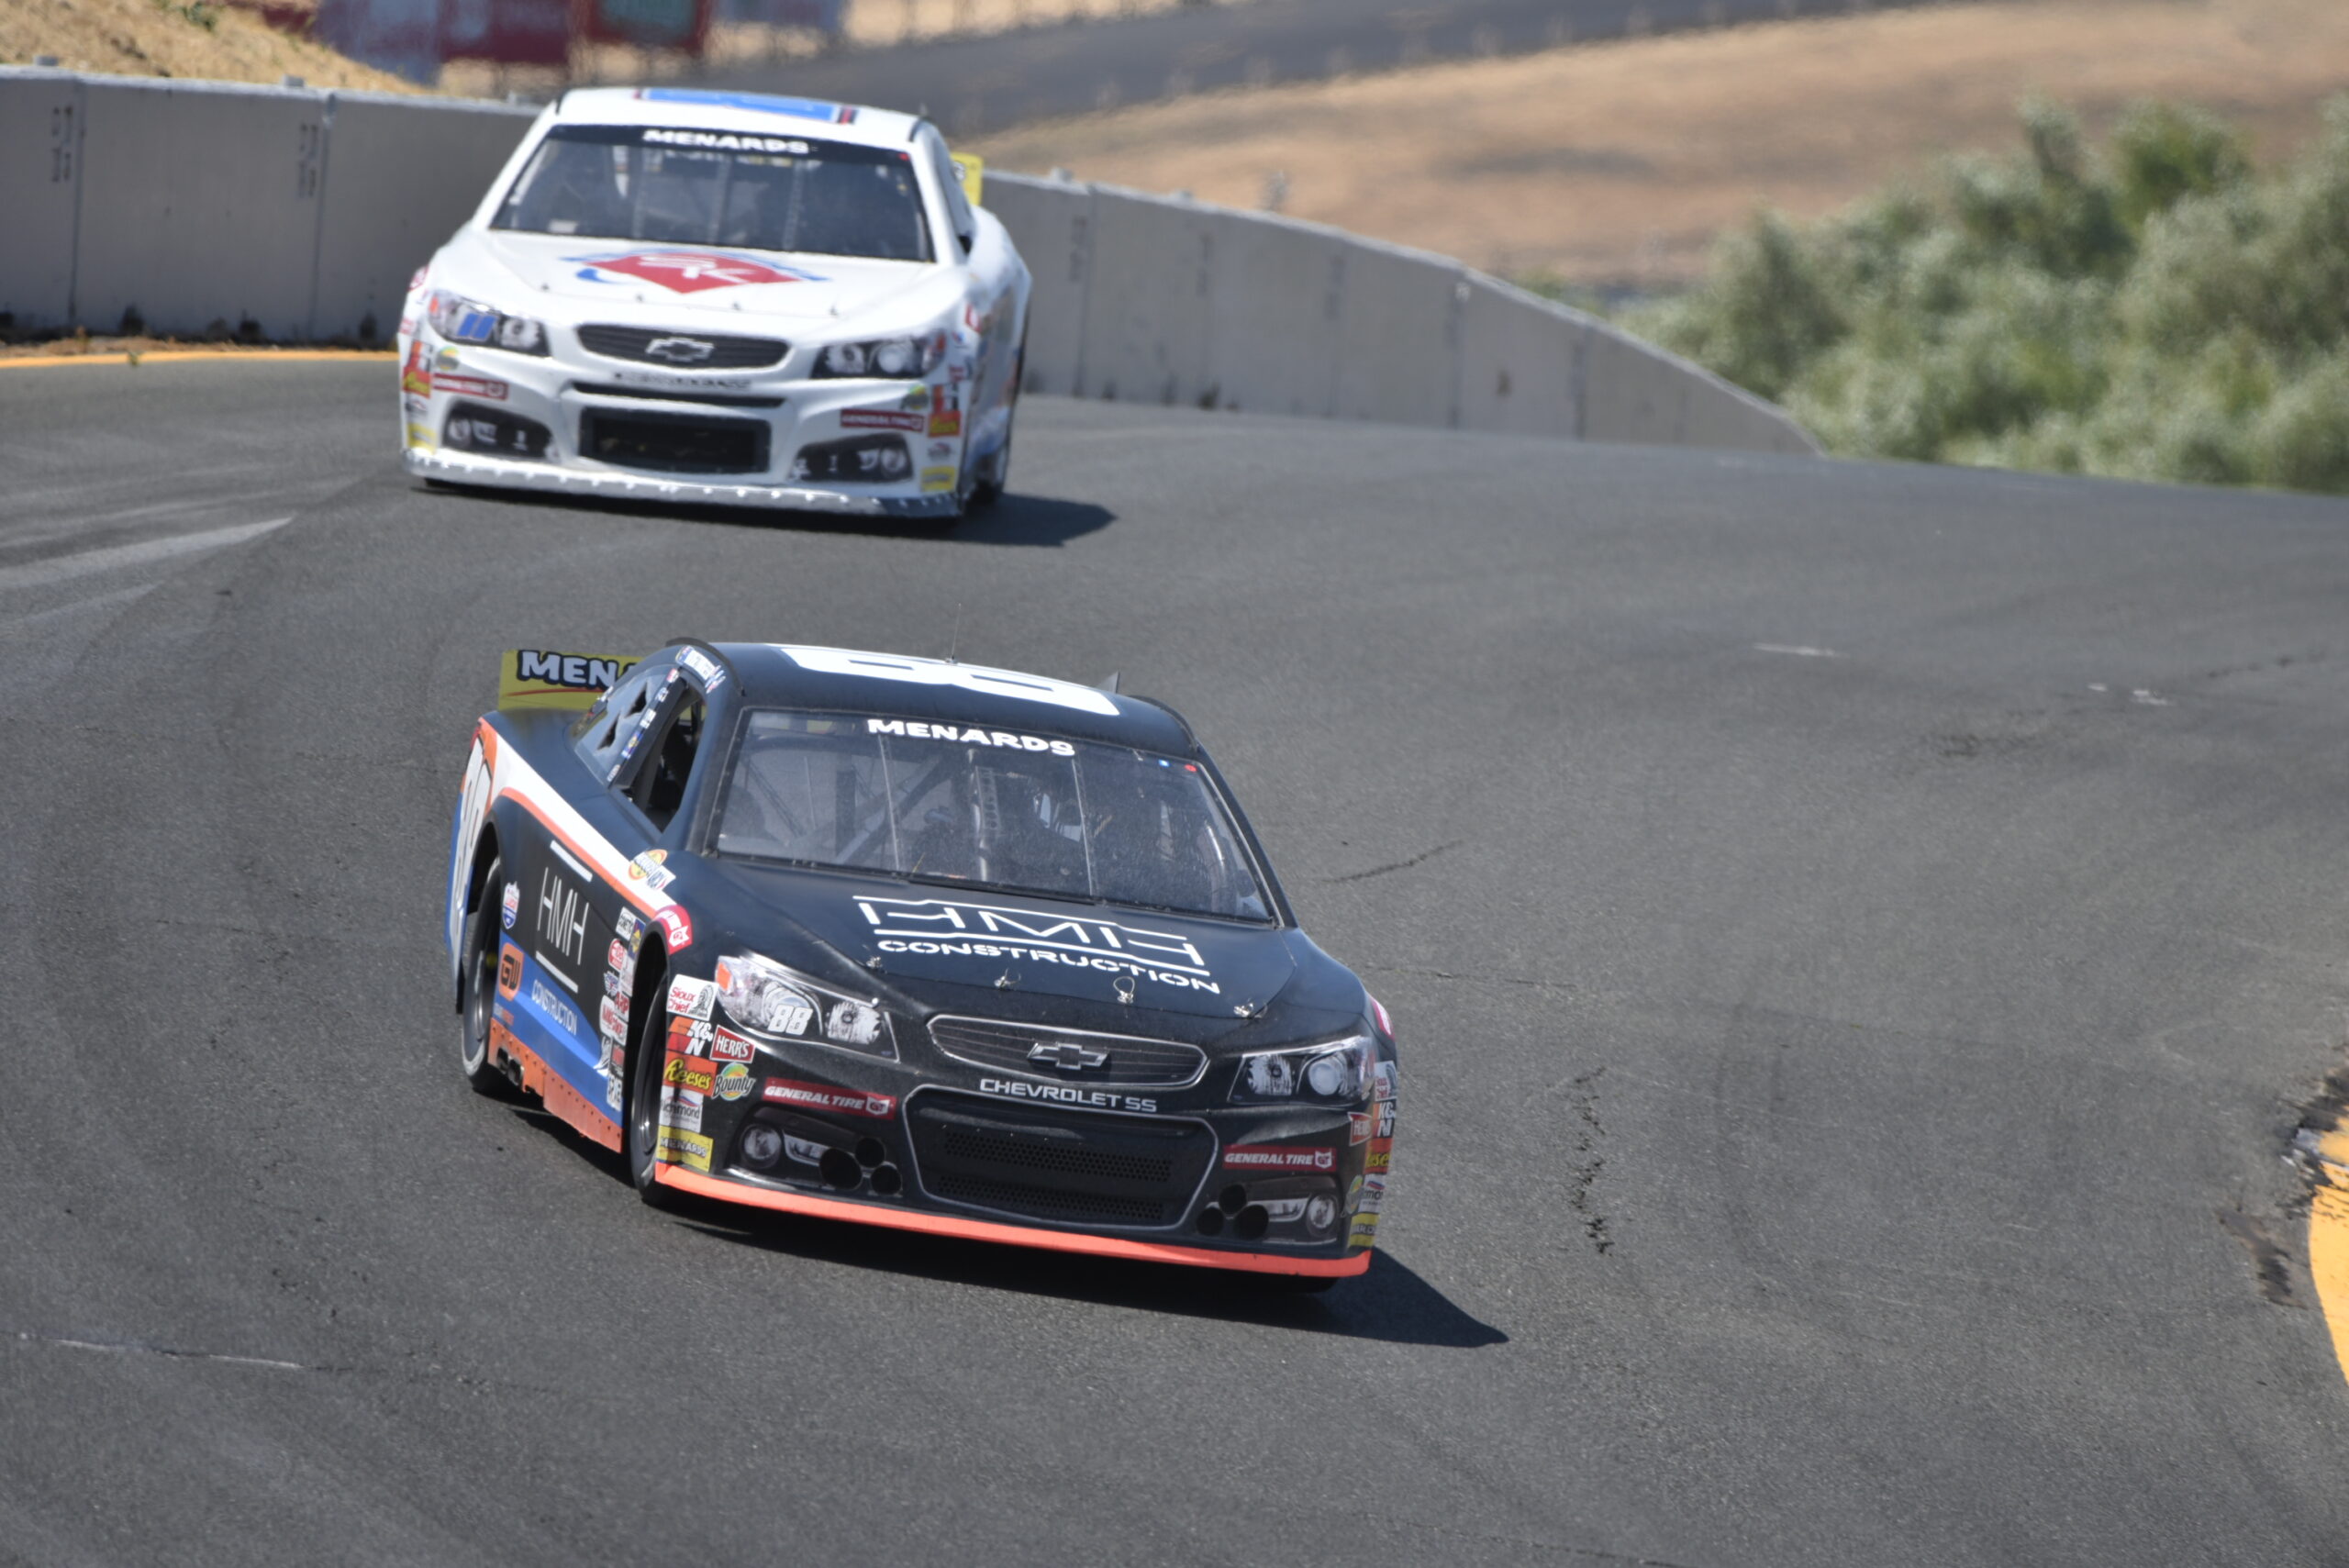 By all means, Bridget Burgess brought her A game at Sonoma. (Photo: Luis Torres/The Podium Finish)